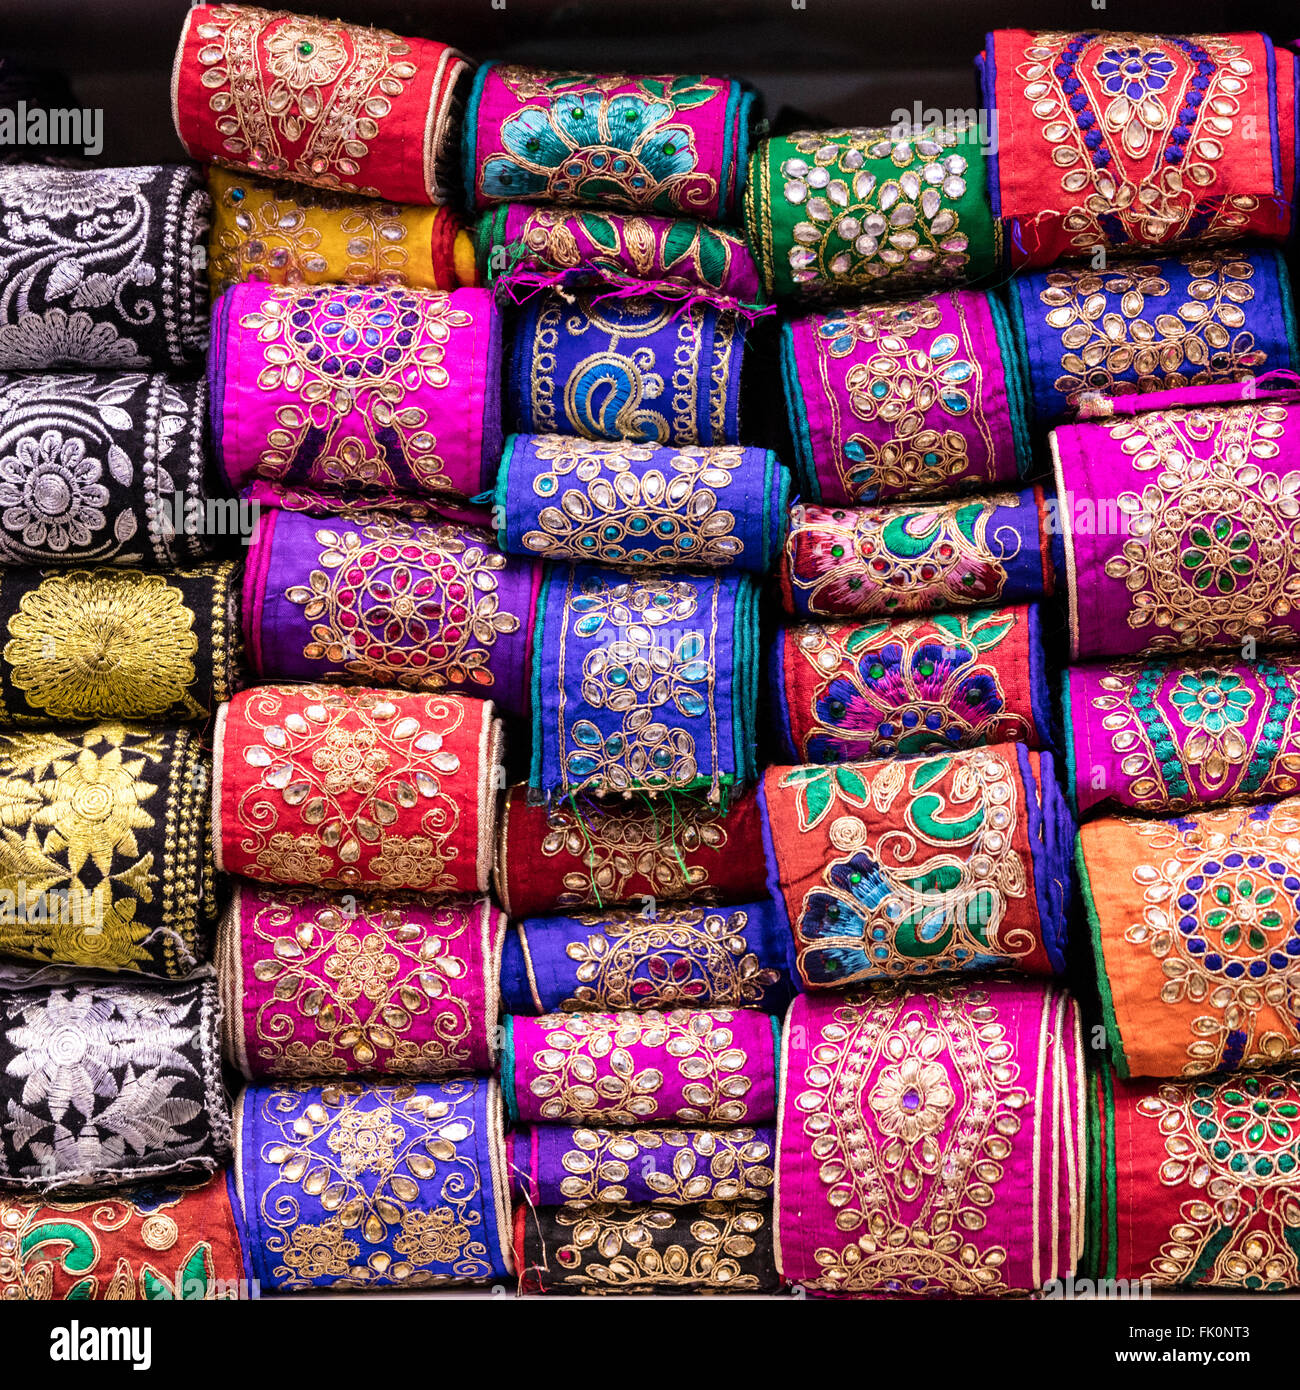 Brightly colored silver and gold embroidered ribbons for sale in notions shop in Hagi (nomadic) bazaar, Shiraz, Iran Stock Photo